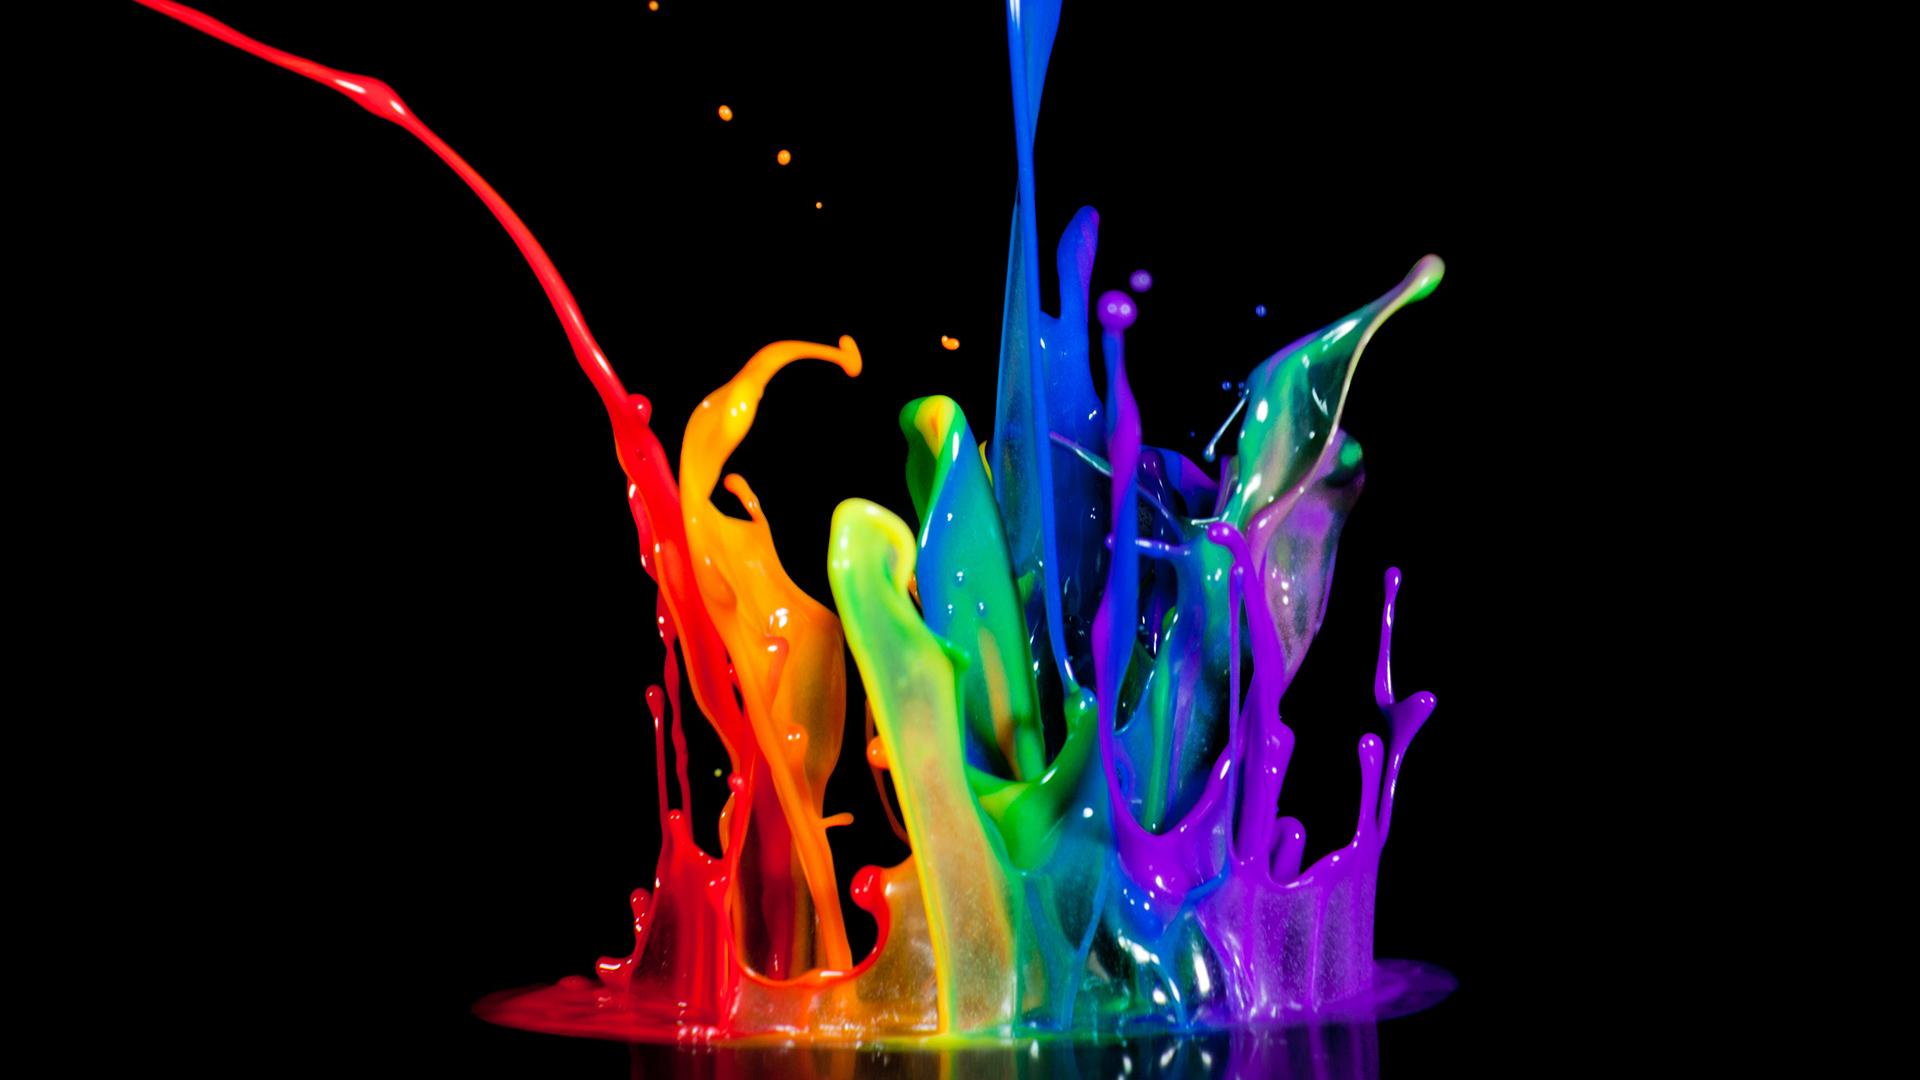 wallpaper abstract colorful cool wallpapers55com Best Wallpapers